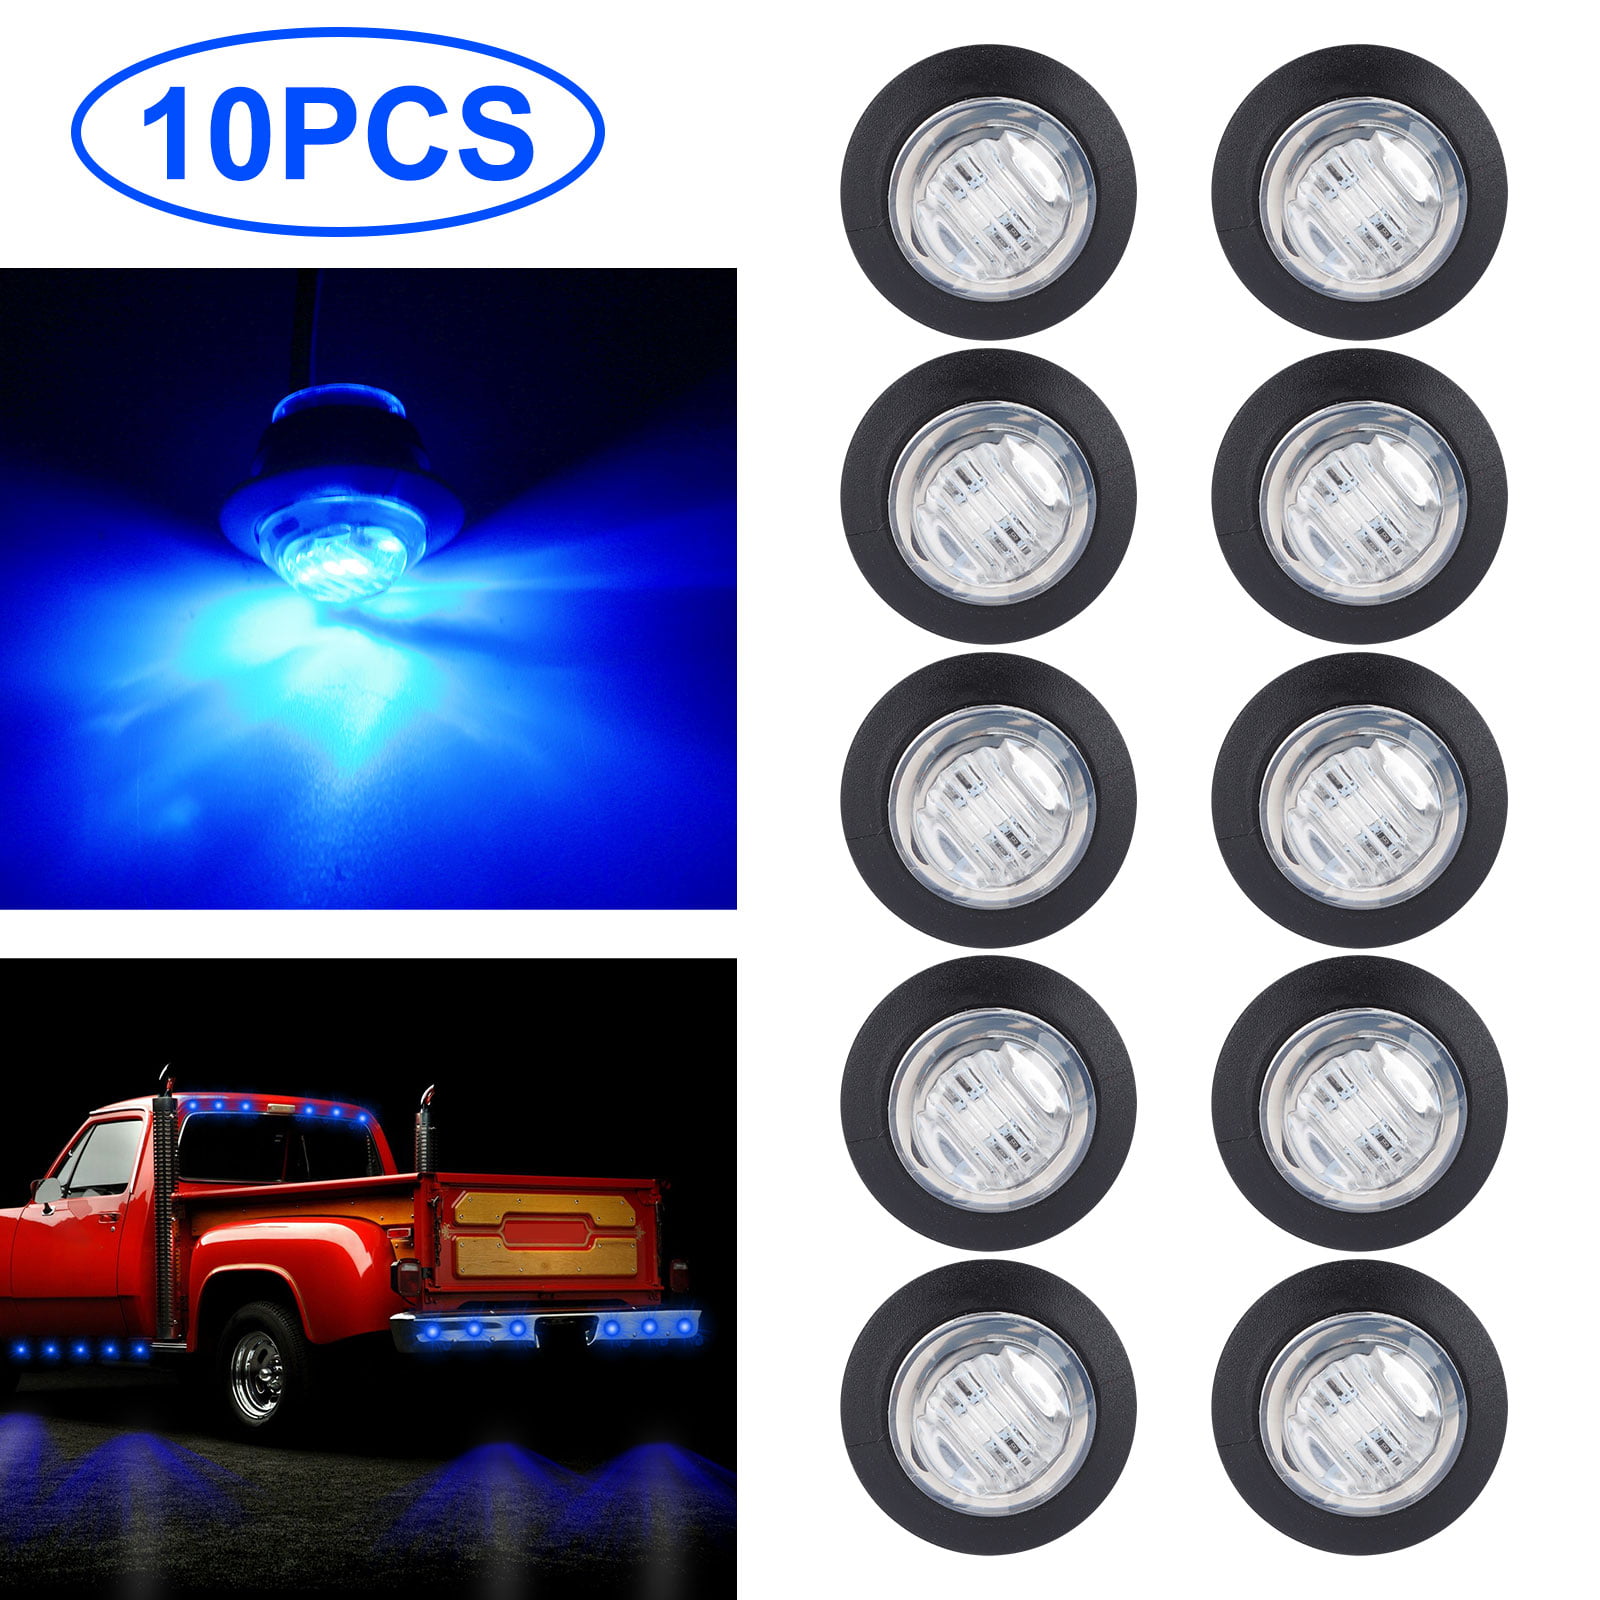 TCTAuto 3/4 inch Yellow LED Side Marker Lights Smoked Lens Mini Bullet Clearance Stop Brake Tail Indicator Light for Trailer Truck with 3 Wire 3 LED Diode Waterproof Rubber Grommet Pack of 10 